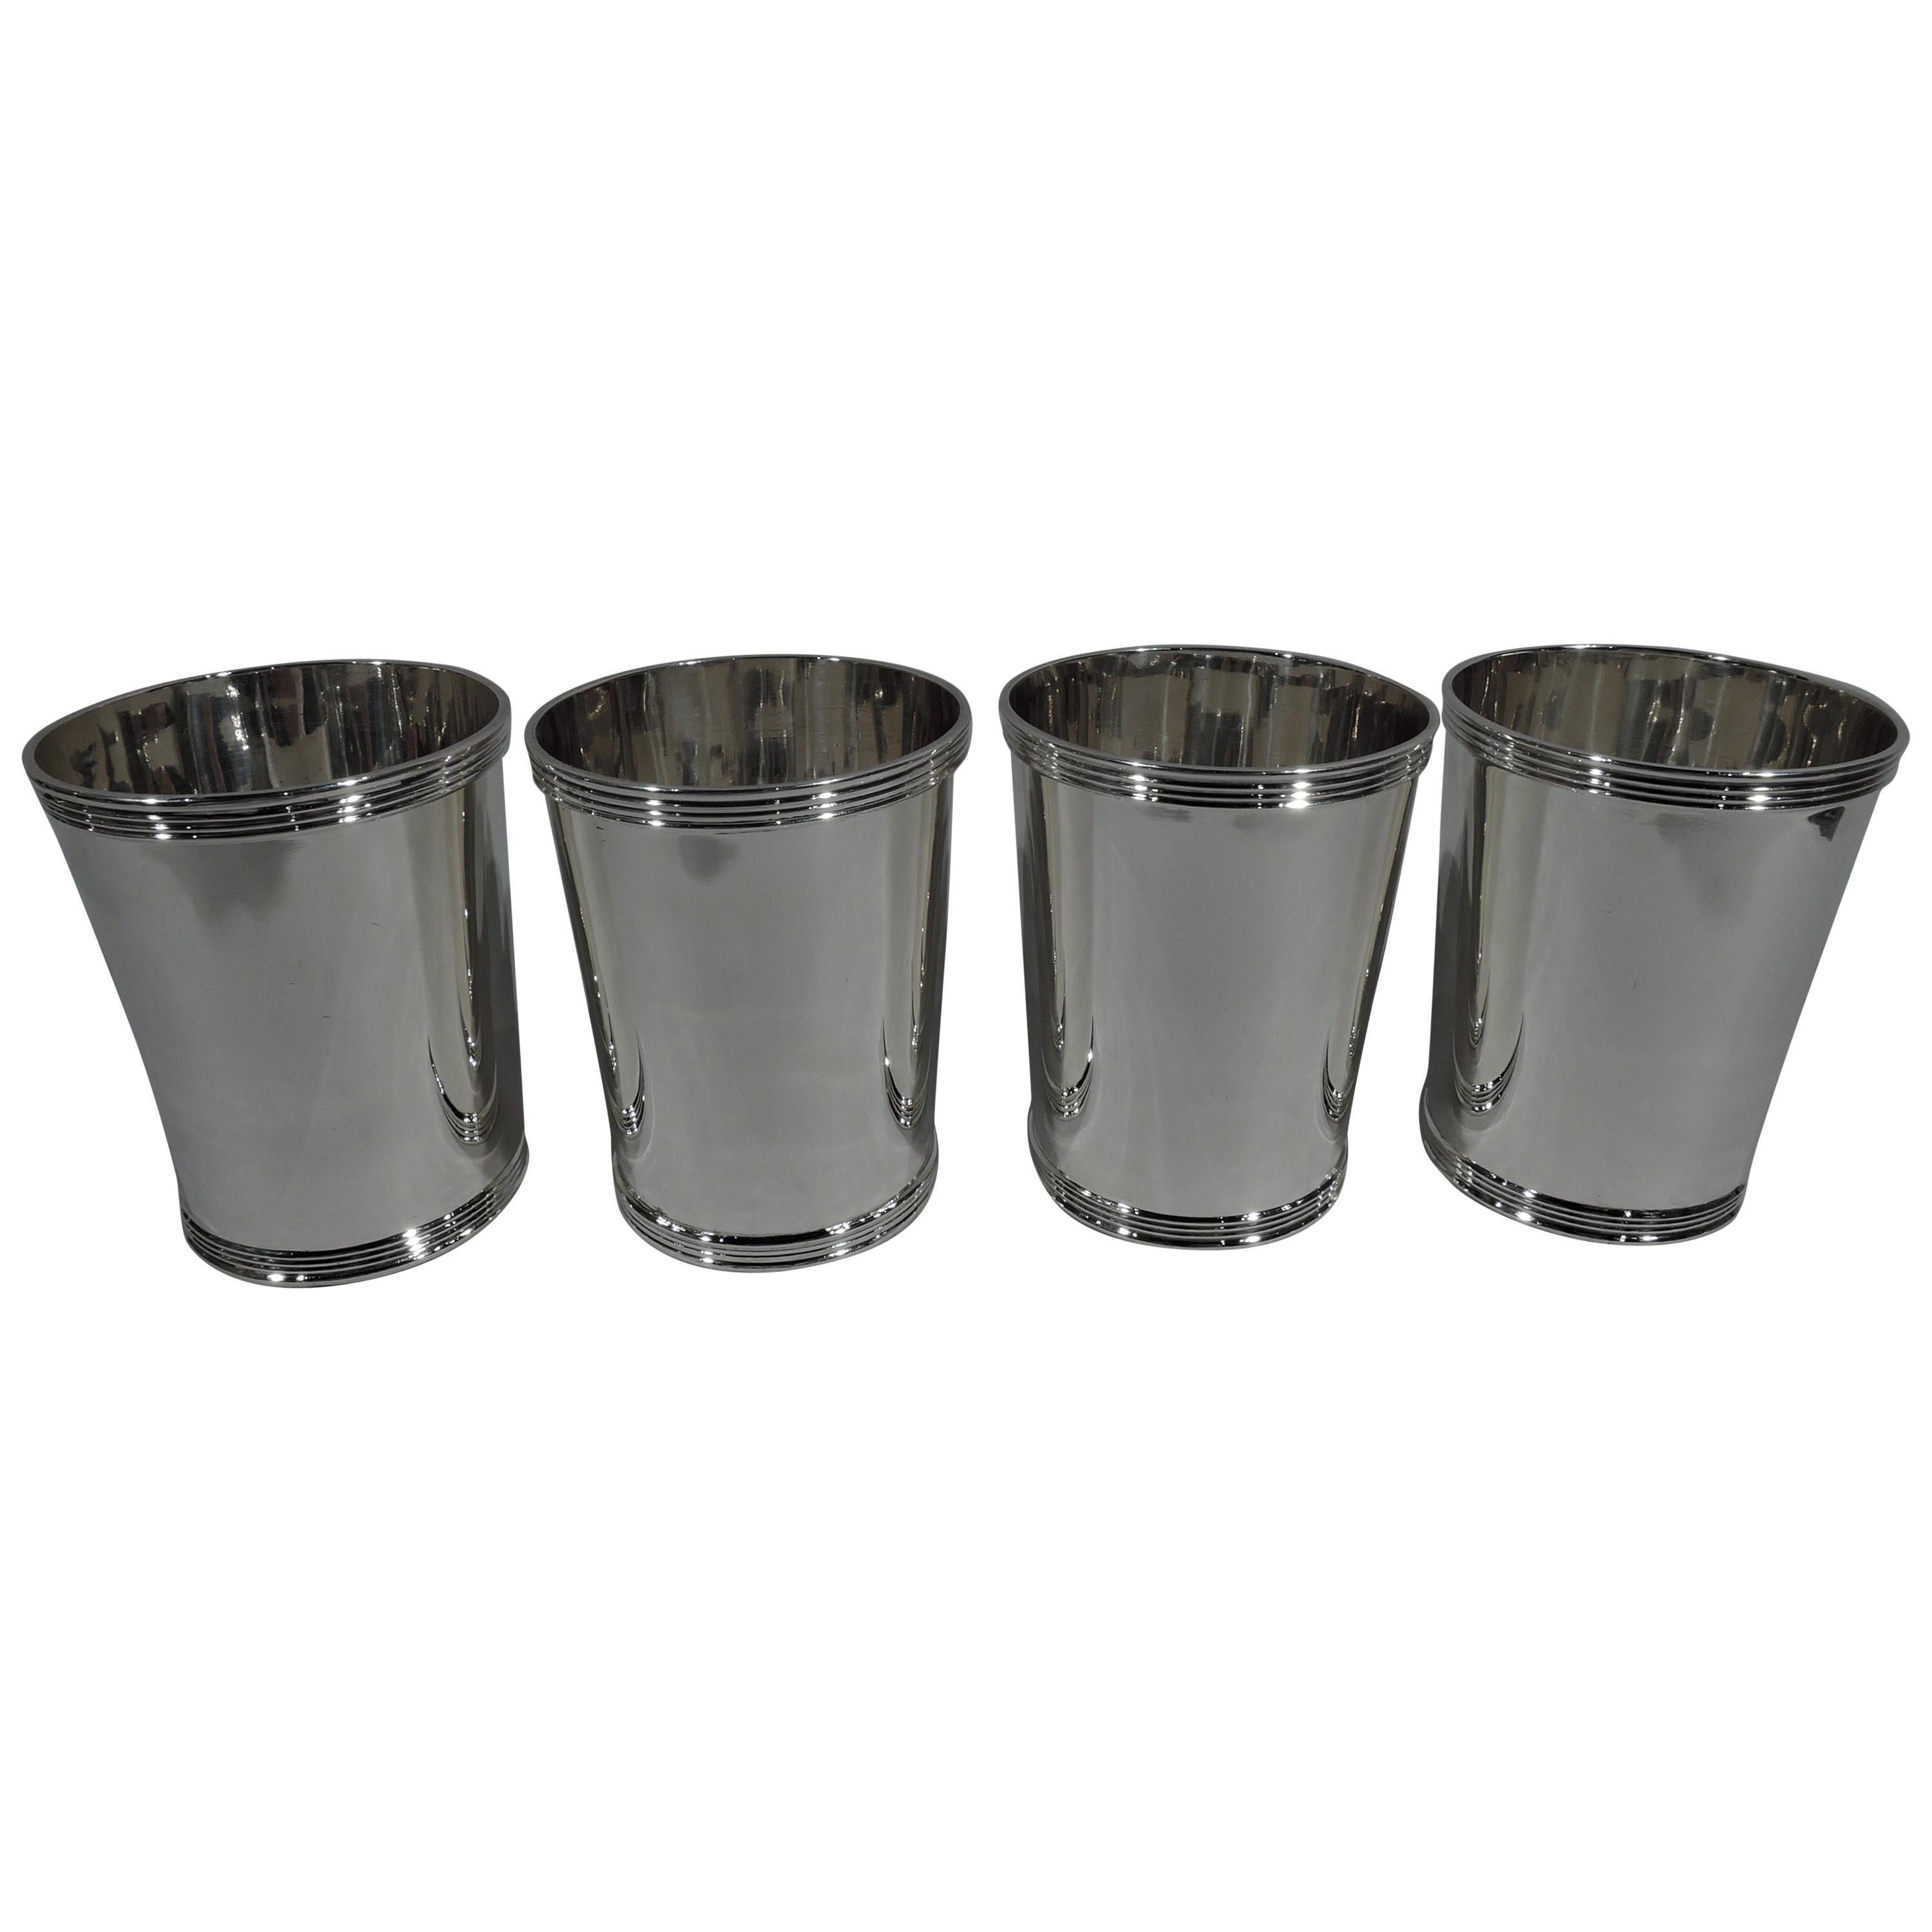 Set of 4 American Sterling Silver Mint Julep Cups by Frank W. Smith